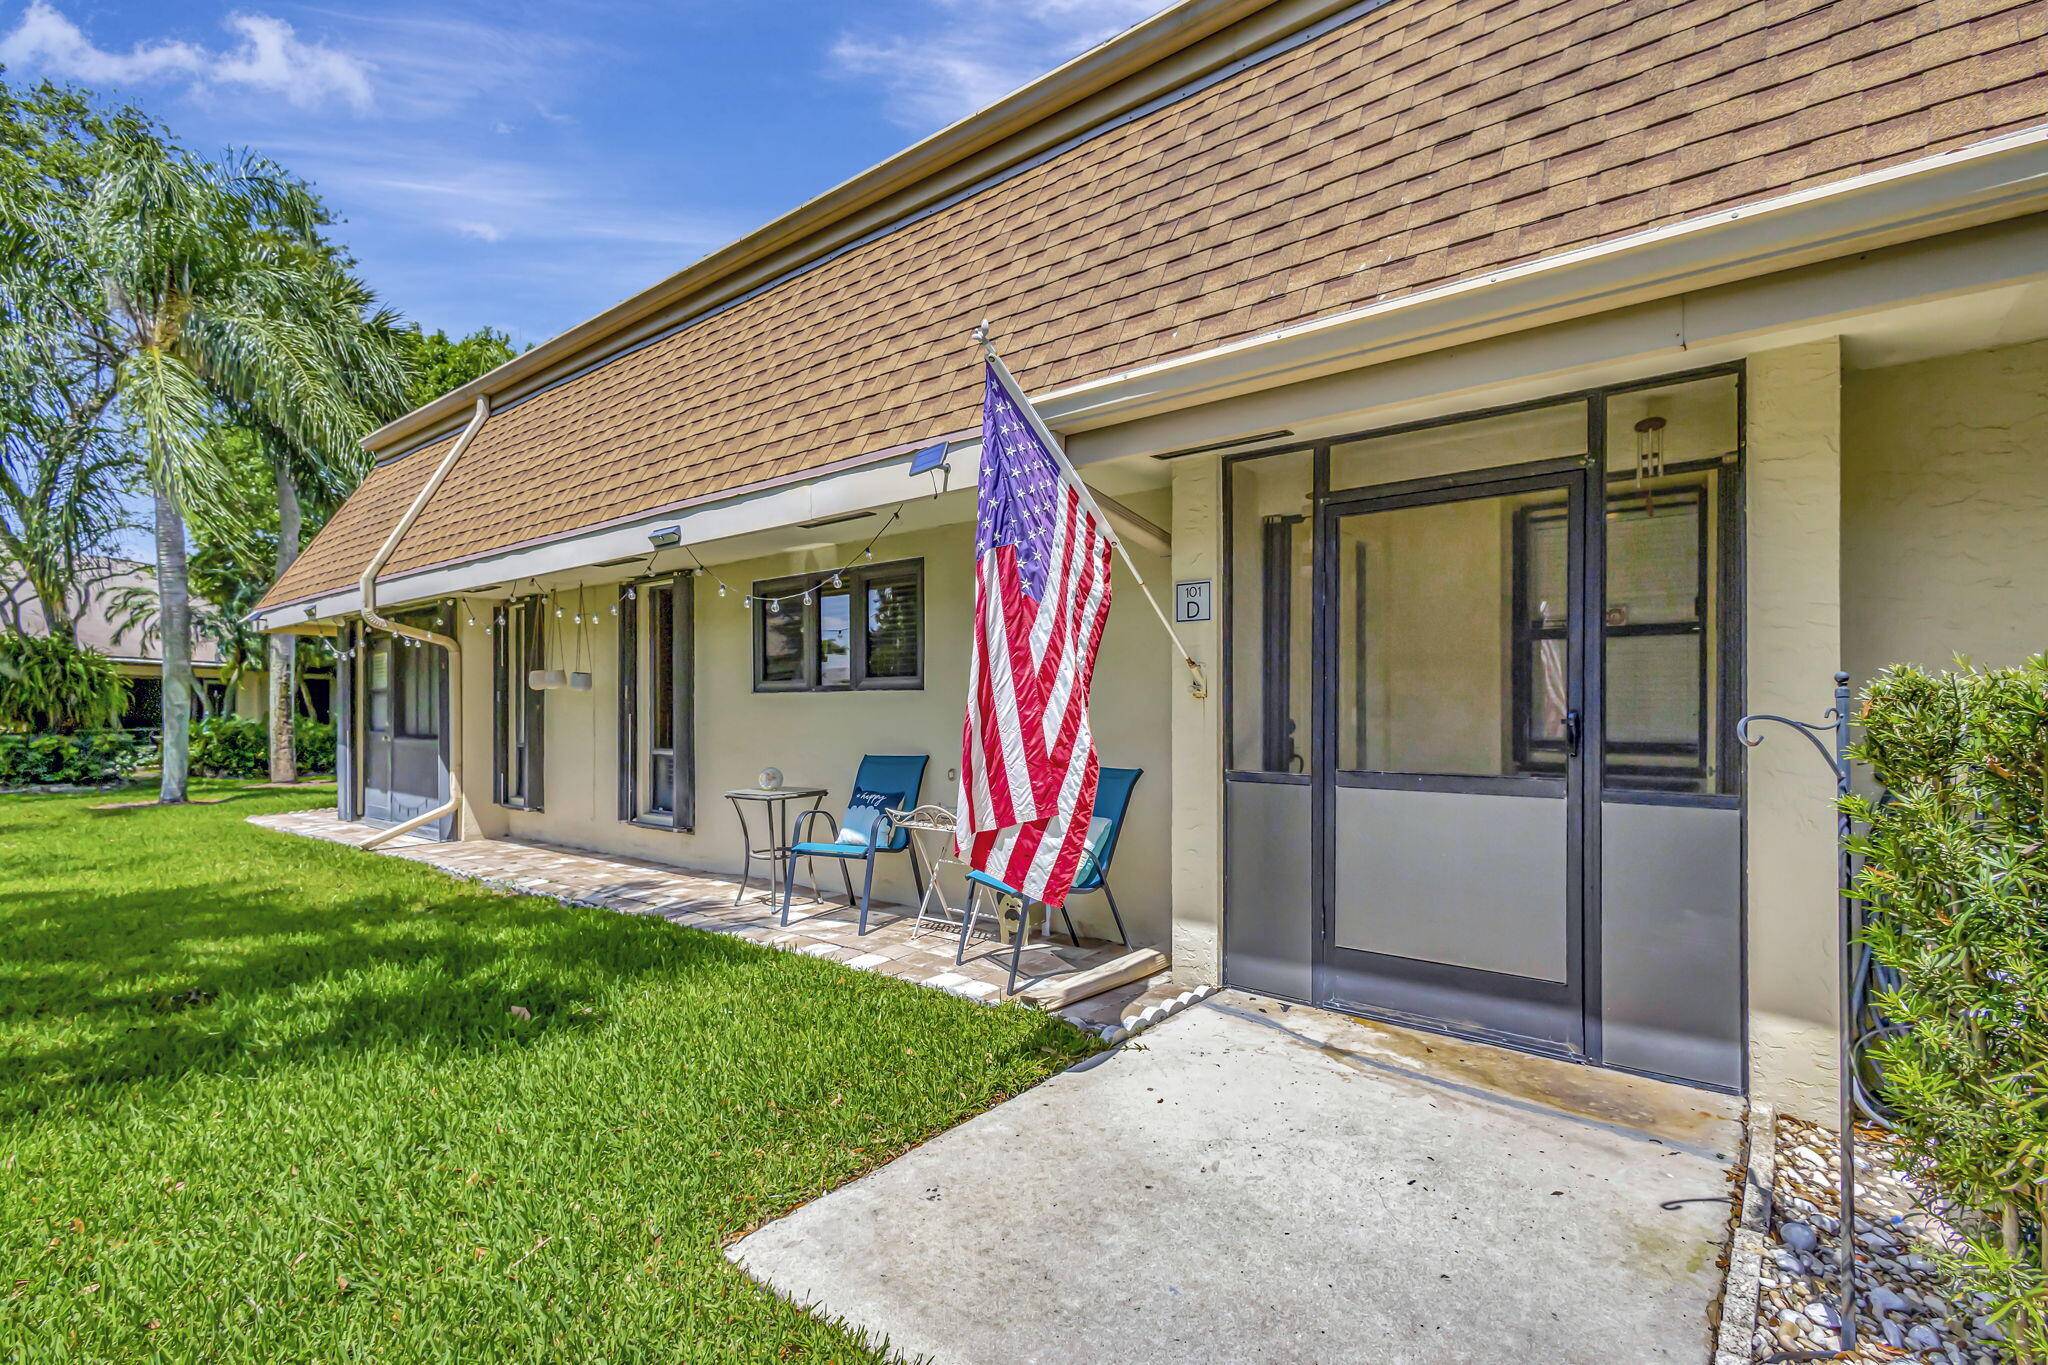 Furnished turnkey spacious 2 bedroom, 2 bathroom condo in highly sought after Augusta Community in Indian Creek, Jupiter.